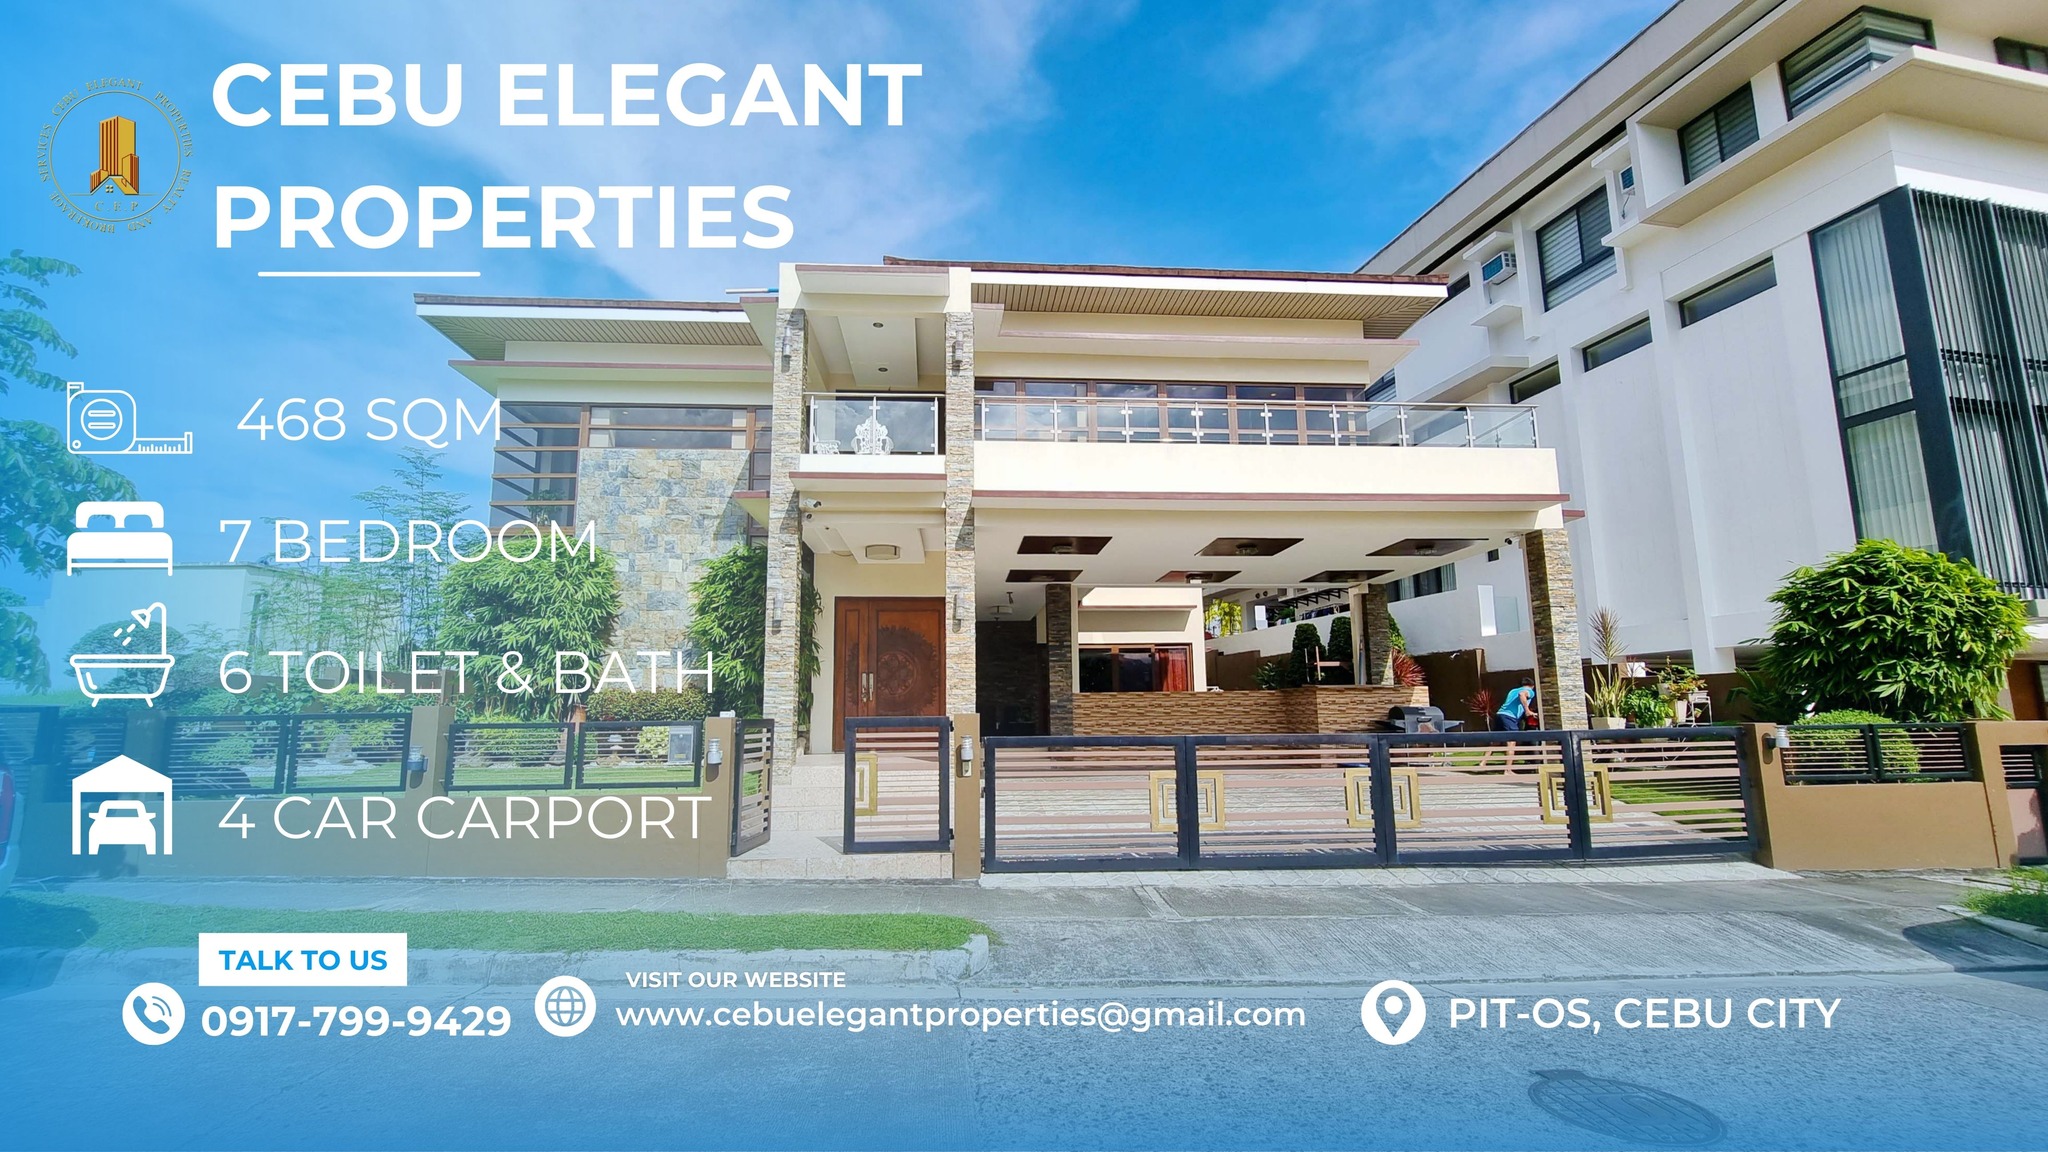 Gorgeous 7 Bedrom House and Lot for Sale with a beautiful pool, Pit-Os, Cebu